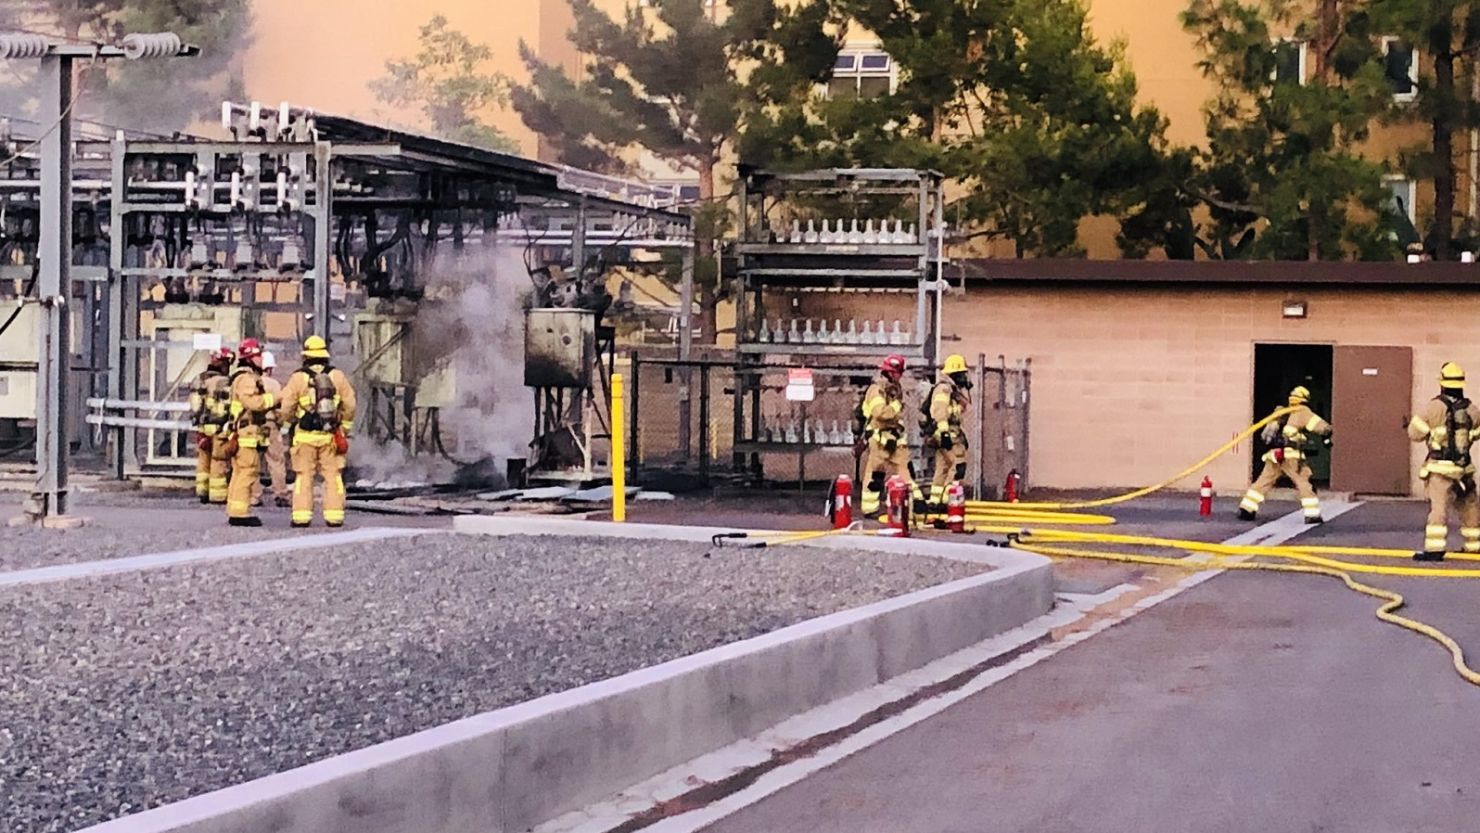 A power outage caused by a fire in Irvine has shut down John Wayne Airport, according to Irvine Police's verified twitted account.